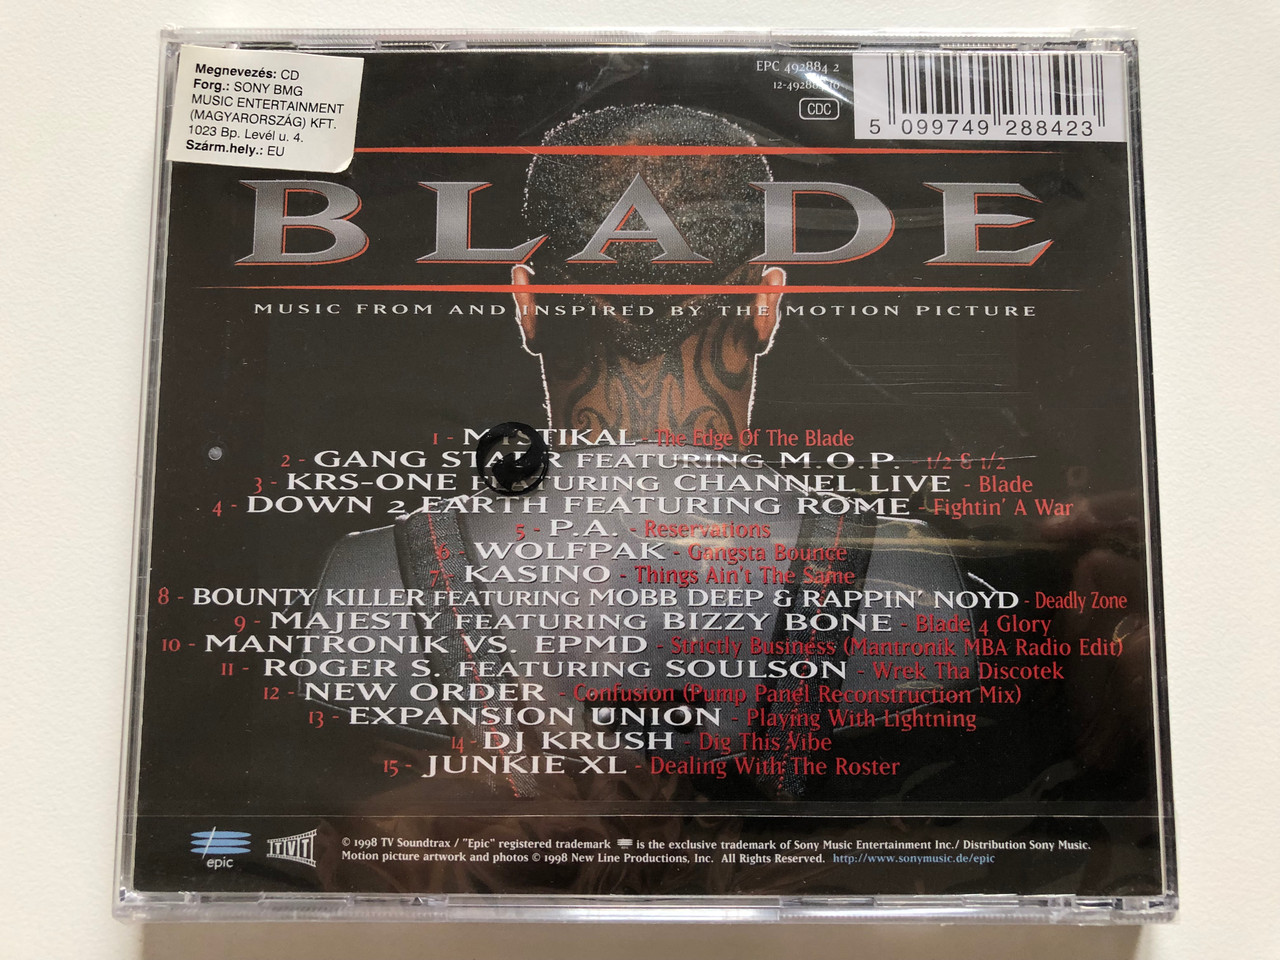 https://cdn10.bigcommerce.com/s-62bdpkt7pb/products/0/images/201159/Blade_Music_From_And_Inspired_By_The_Motion_Picture_Featuring_new_and_unreleased_music_from_Gang_Starr_M._O._P._KRS-One_Channel_Live_Mystikal_Majesty_featuring_Bizzy_Bone_Epic_A__48865.1638892033.1280.1280.JPG?c=2&_gl=1*1nf5prr*_ga*MjA2NTIxMjE2MC4xNTkwNTEyNTMy*_ga_WS2VZYPC6G*MTYzODg5MDQxNC4yMDQuMC4xNjM4ODkwNDE0LjYw